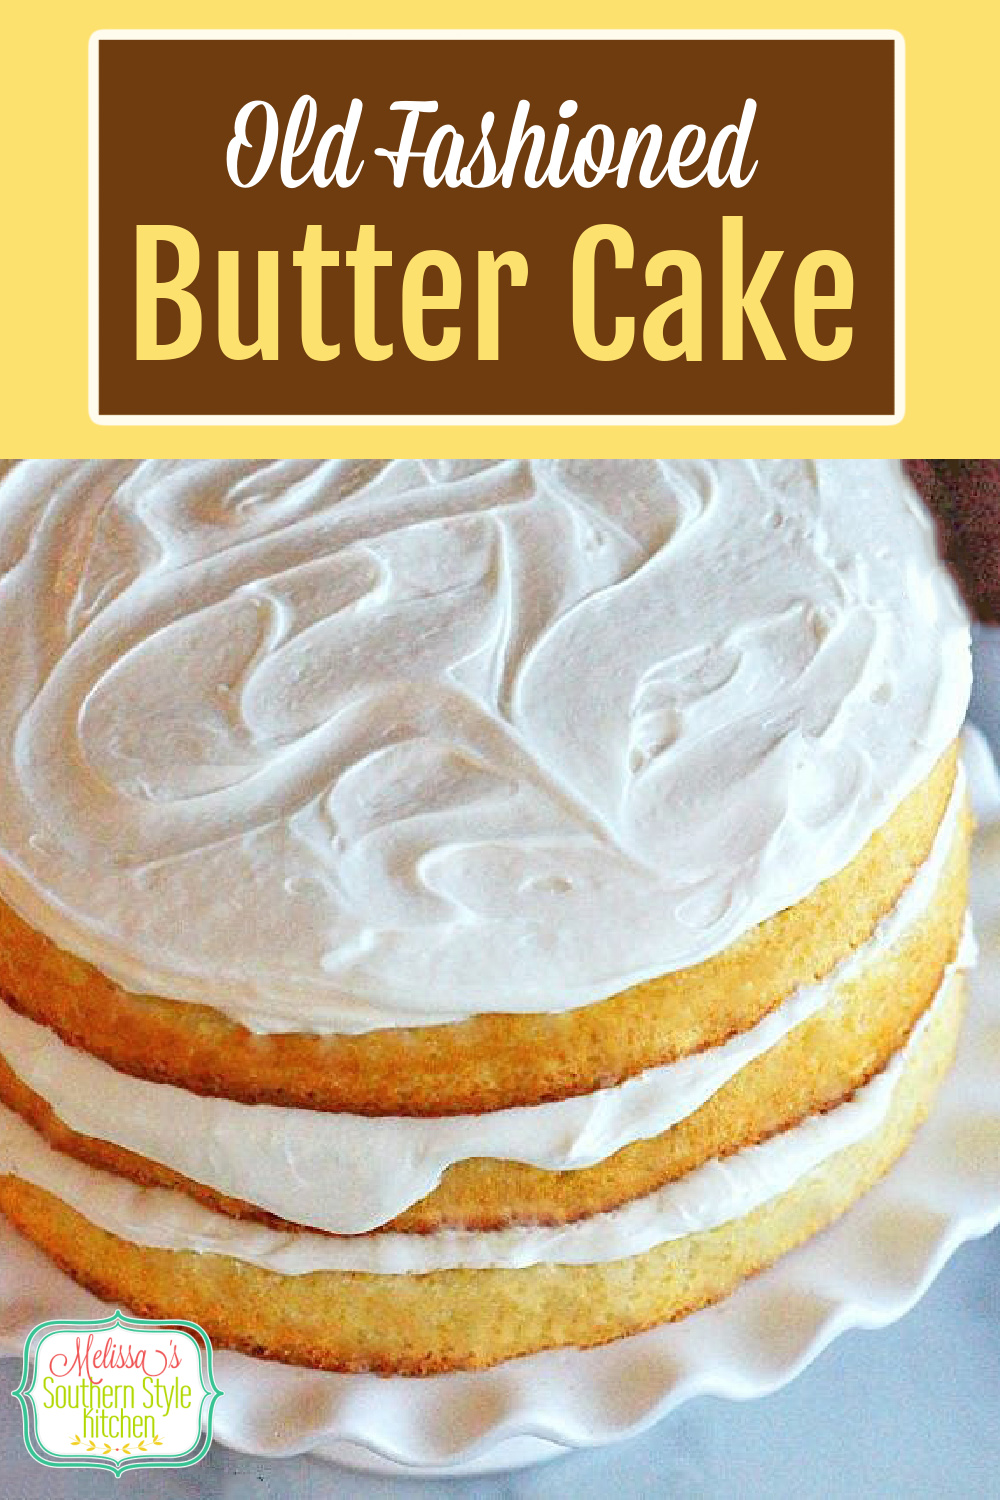 This Old Fashioned Butter Cake can be made in layers, as a sheet cake or turned into cupcakes #buttercake #yellowcake #homeadeyellowcakerecipe #cakes #cakerecipes #1234cake #dessertfoodrecipes #sweets #desserts #southernrecipes #southernfood #melissassouthernstylekitchen #holidaybaking #birthdaycake